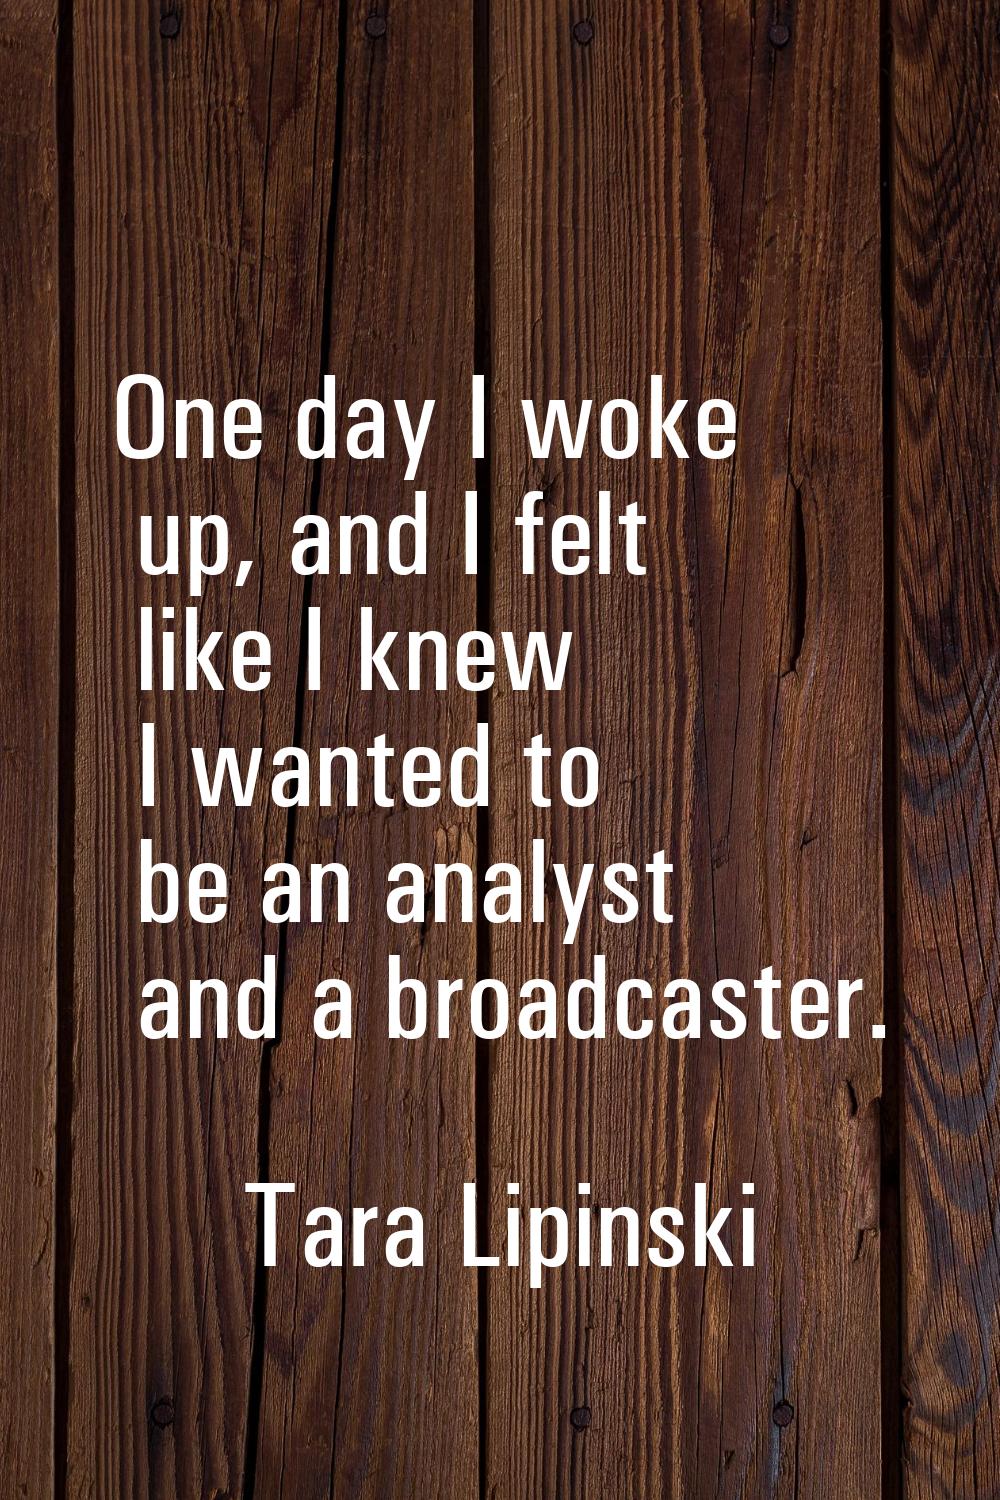 One day I woke up, and I felt like I knew I wanted to be an analyst and a broadcaster.